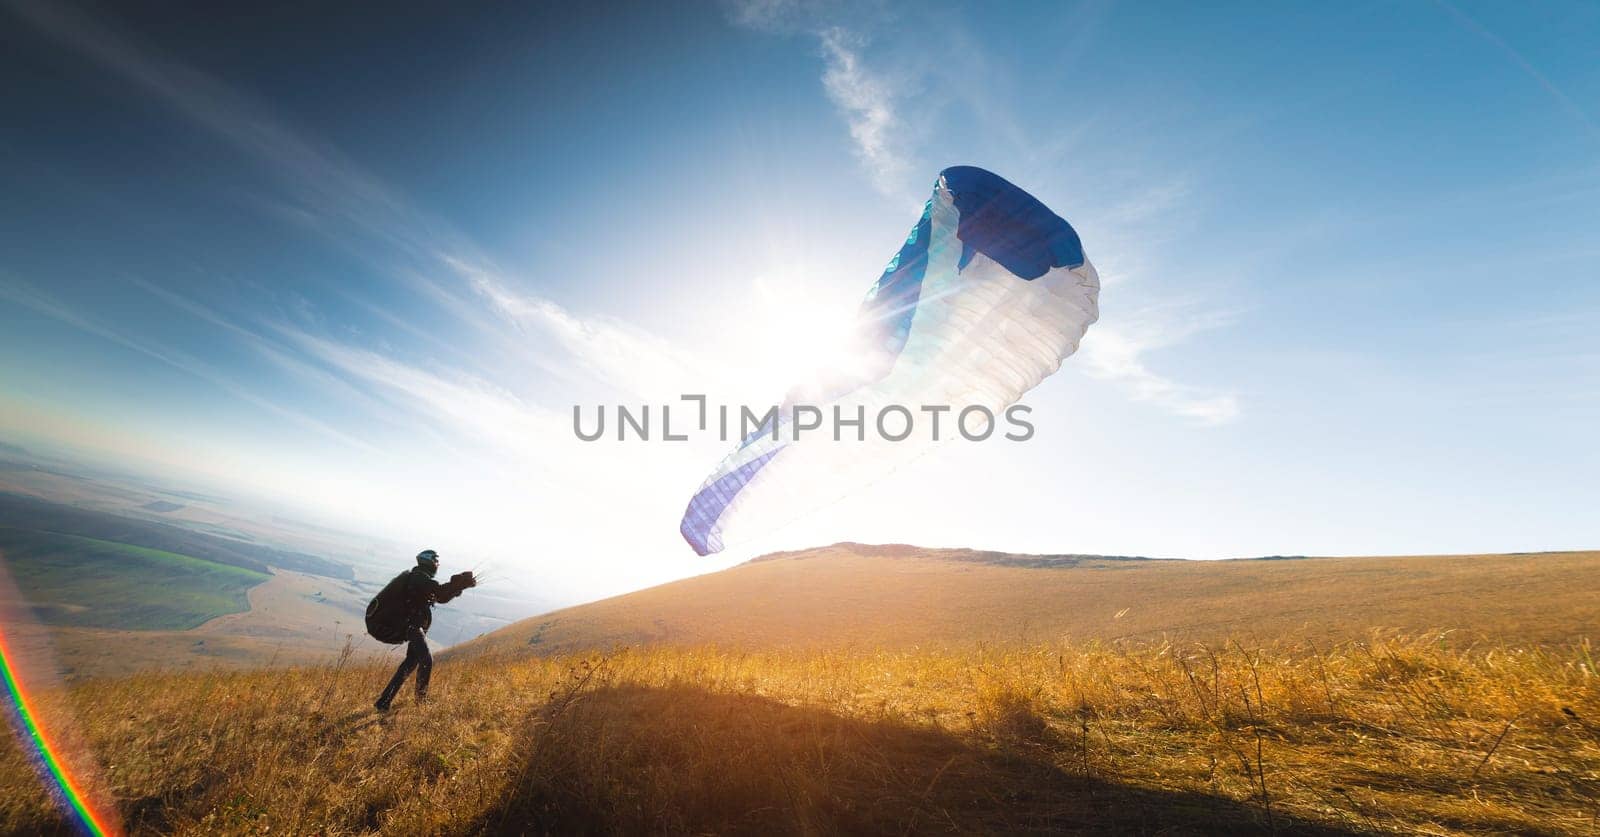 A paraglider with a blue parachute takes off. A man takes off and lands on a yellow field. a man preparing to take off with an open paraglider already in the air